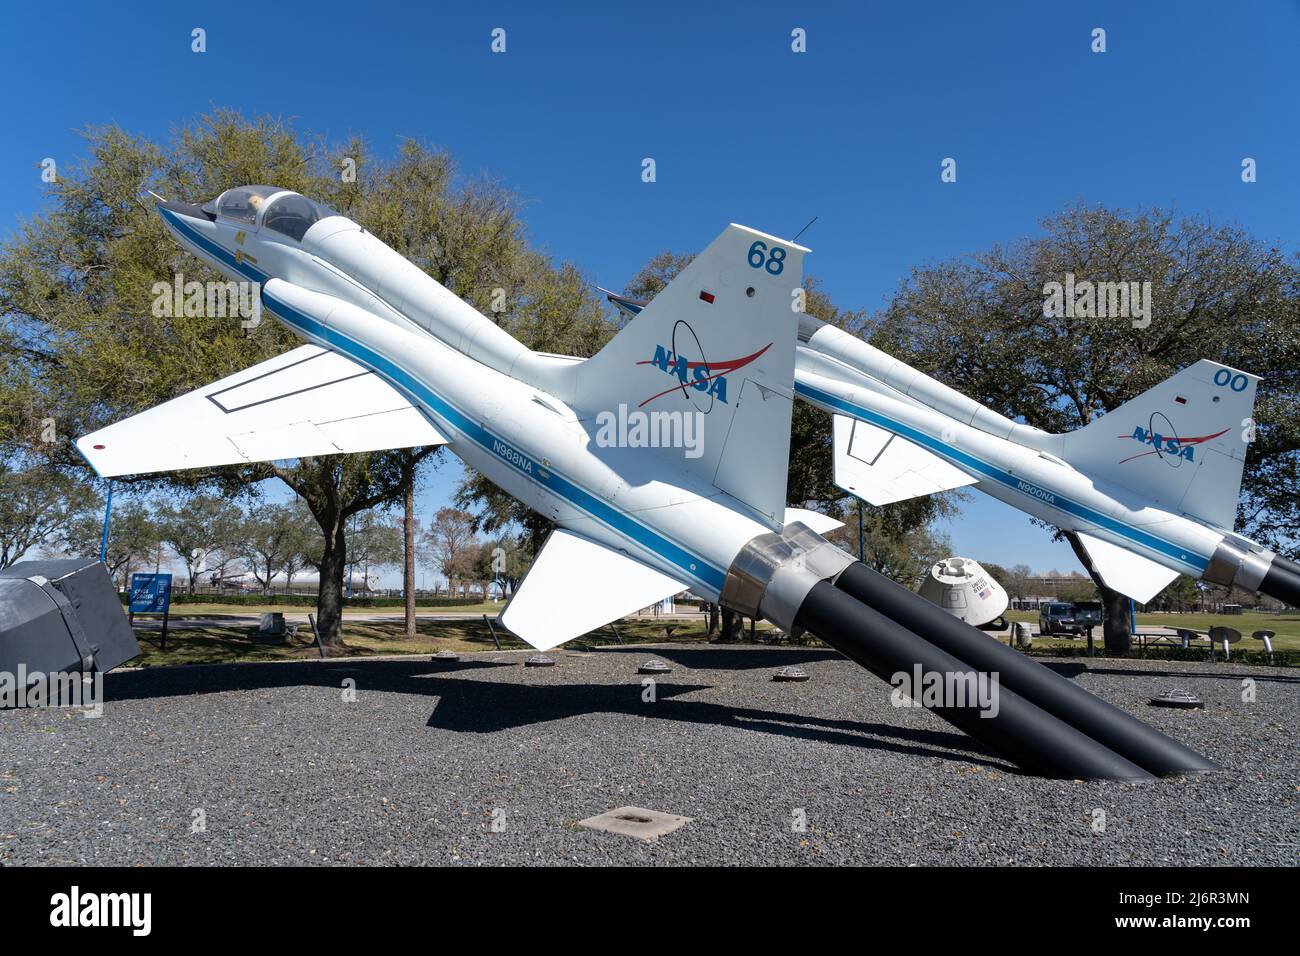 Houston, Texas, USA - March 12, 2022: Two Northrop T-38 Talon supersonic jet trainers displayed at Talon Park in the Johnson Space Center in Houston, Stock Photo